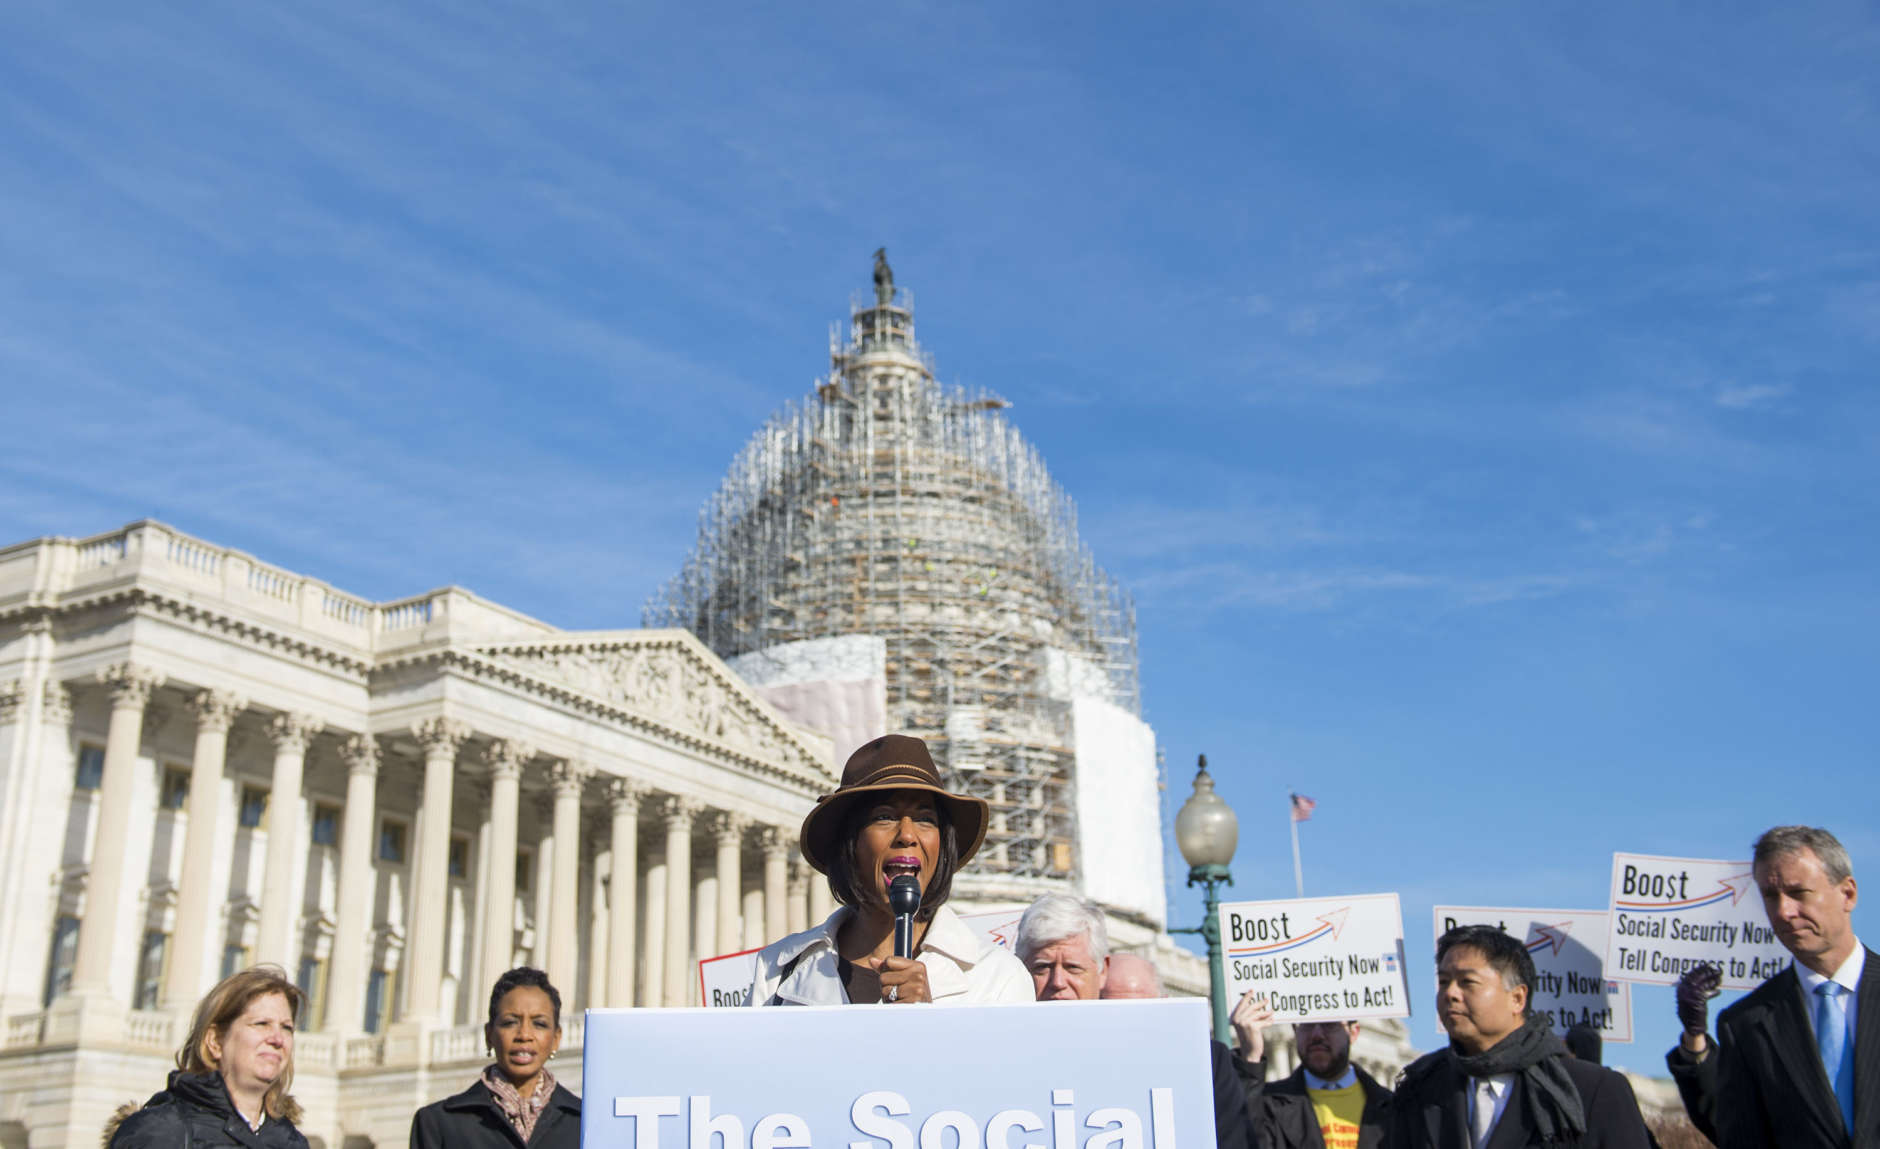 Global Policy Solutions President and CEO Dr. Maya Rockeymoore speaks during a news conference on Capitol Hill in Washington, Wednesday, March 18, 2105, to announce the introduction of the Social Security 2100 Act. (AP Photo/Molly Riley)